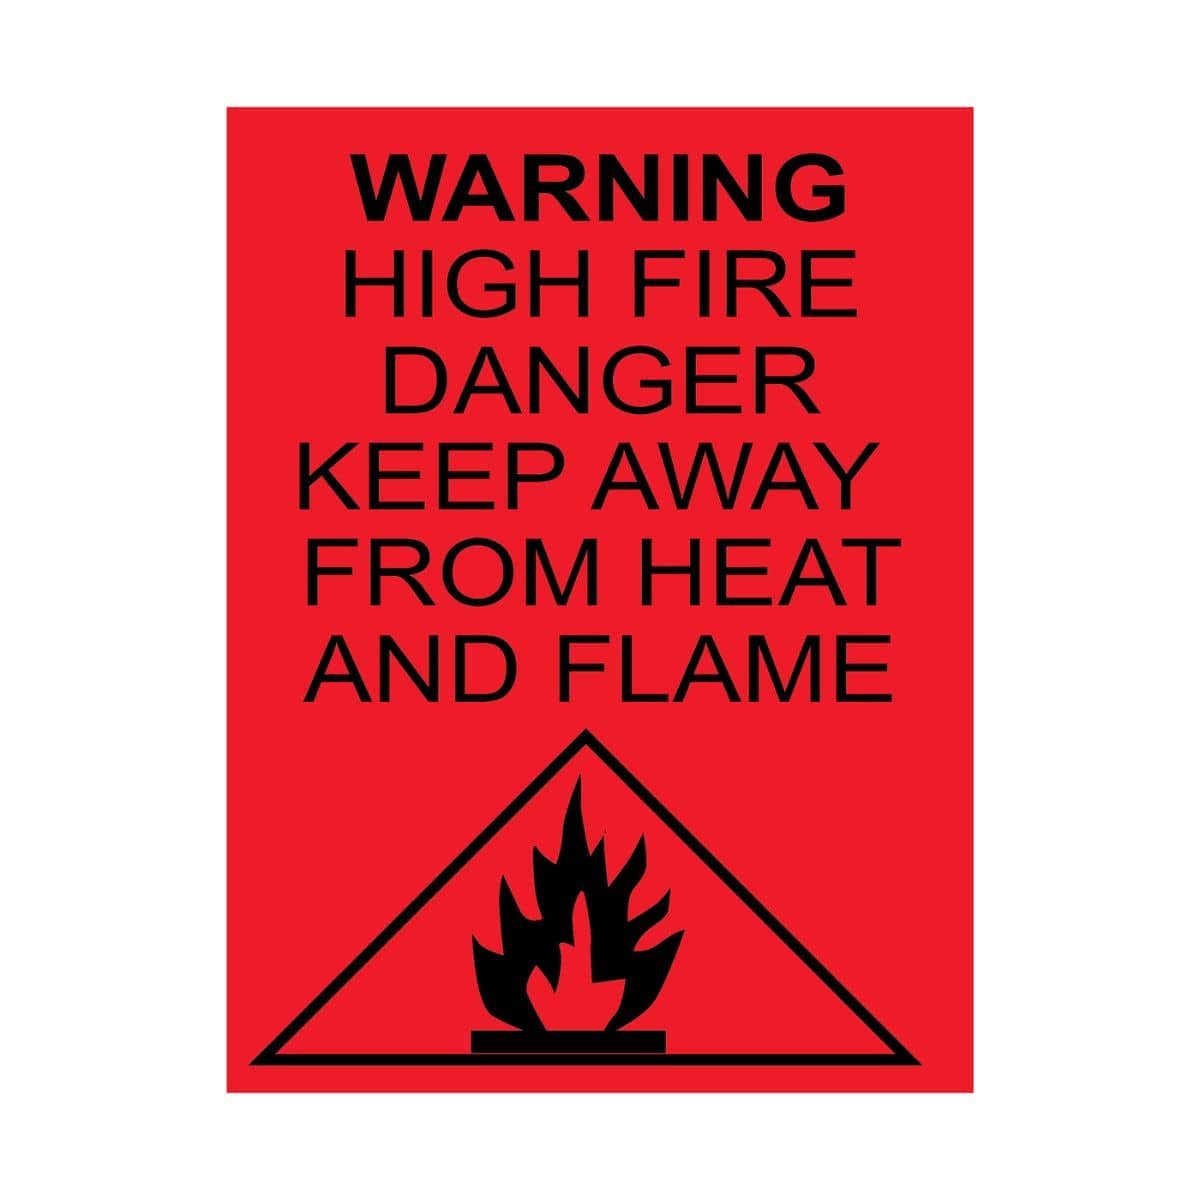 WARNING: HIGH FIRE DANGER KEEP AWAY FROM HEAT AND FLAME